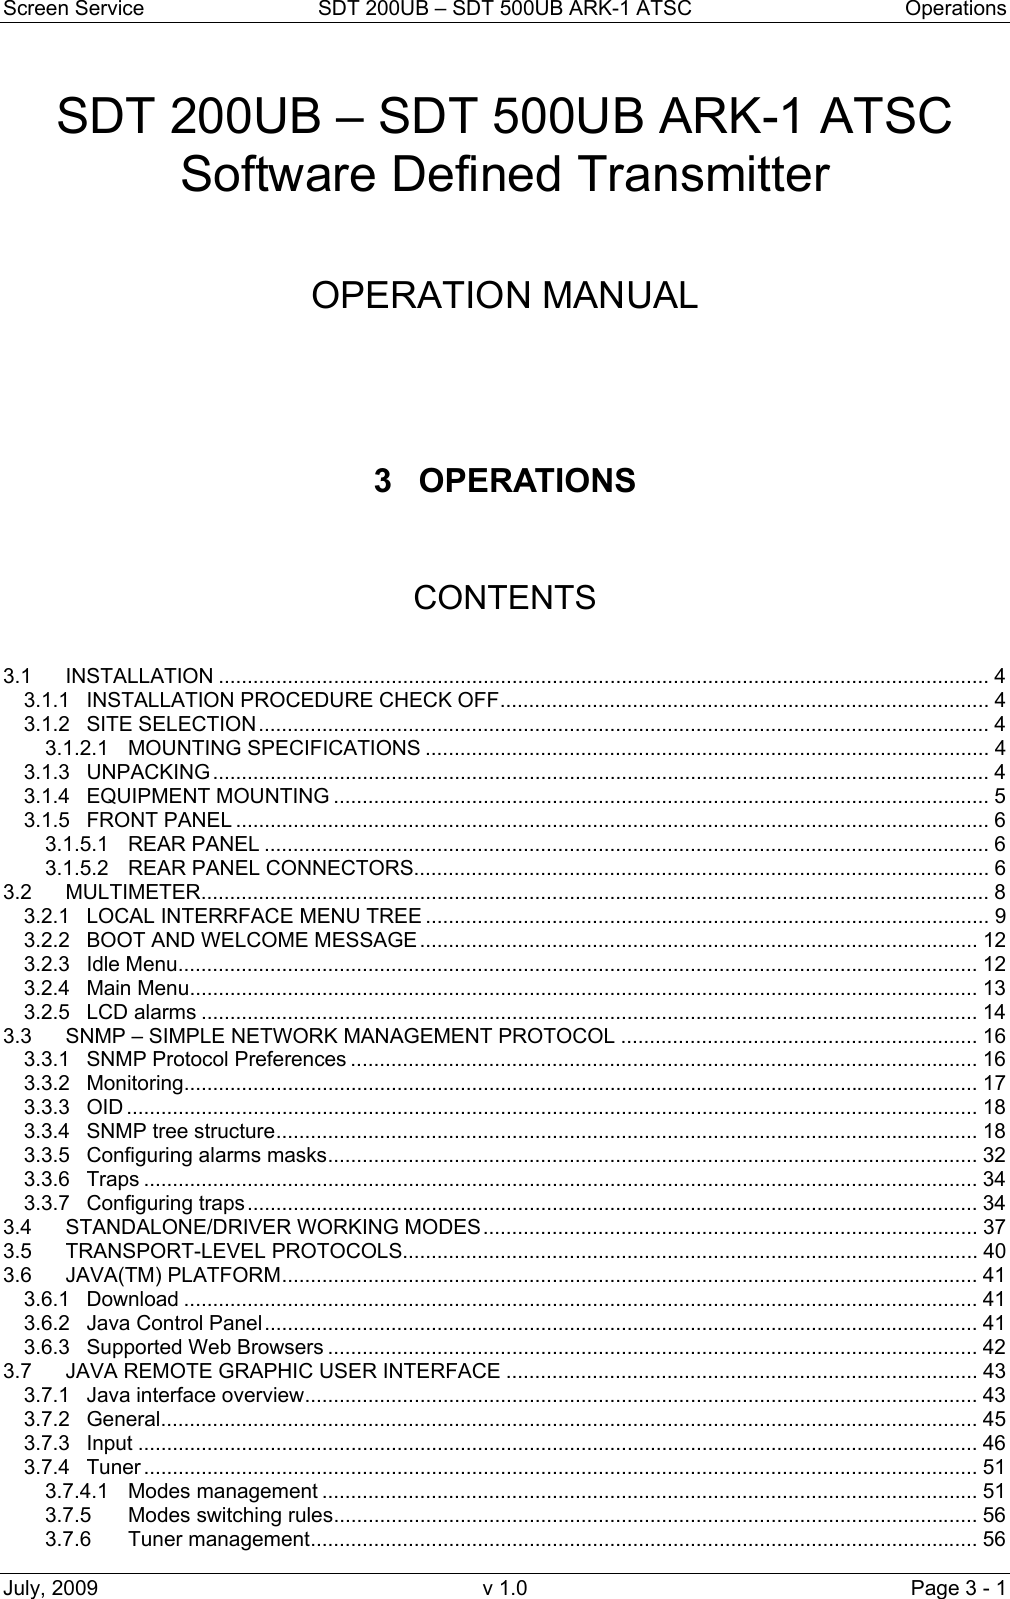 Screen Service  SDT 200UB – SDT 500UB ARK-1 ATSC  Operations July, 2009  v 1.0  Page 3 - 1   SDT 200UB – SDT 500UB ARK-1 ATSC Software Defined Transmitter    OPERATION MANUAL      3 OPERATIONS    CONTENTS   3.1 INSTALLATION ...................................................................................................................................... 4 3.1.1 INSTALLATION PROCEDURE CHECK OFF..................................................................................... 4 3.1.2 SITE SELECTION............................................................................................................................... 4 3.1.2.1 MOUNTING SPECIFICATIONS .................................................................................................. 4 3.1.3 UNPACKING....................................................................................................................................... 4 3.1.4 EQUIPMENT MOUNTING .................................................................................................................. 5 3.1.5 FRONT PANEL ................................................................................................................................... 6 3.1.5.1 REAR PANEL .............................................................................................................................. 6 3.1.5.2 REAR PANEL CONNECTORS.................................................................................................... 6 3.2 MULTIMETER......................................................................................................................................... 8 3.2.1 LOCAL INTERRFACE MENU TREE .................................................................................................. 9 3.2.2 BOOT AND WELCOME MESSAGE................................................................................................. 12 3.2.3 Idle Menu........................................................................................................................................... 12 3.2.4 Main Menu......................................................................................................................................... 13 3.2.5 LCD alarms ....................................................................................................................................... 14 3.3 SNMP – SIMPLE NETWORK MANAGEMENT PROTOCOL .............................................................. 16 3.3.1 SNMP Protocol Preferences ............................................................................................................. 16 3.3.2 Monitoring.......................................................................................................................................... 17 3.3.3 OID .................................................................................................................................................... 18 3.3.4 SNMP tree structure.......................................................................................................................... 18 3.3.5 Configuring alarms masks................................................................................................................. 32 3.3.6 Traps ................................................................................................................................................. 34 3.3.7 Configuring traps............................................................................................................................... 34 3.4 STANDALONE/DRIVER WORKING MODES...................................................................................... 37 3.5 TRANSPORT-LEVEL PROTOCOLS.................................................................................................... 40 3.6 JAVA(TM) PLATFORM......................................................................................................................... 41 3.6.1 Download .......................................................................................................................................... 41 3.6.2 Java Control Panel............................................................................................................................ 41 3.6.3 Supported Web Browsers ................................................................................................................. 42 3.7 JAVA REMOTE GRAPHIC USER INTERFACE .................................................................................. 43 3.7.1 Java interface overview..................................................................................................................... 43 3.7.2 General.............................................................................................................................................. 45 3.7.3 Input .................................................................................................................................................. 46 3.7.4 Tuner ................................................................................................................................................. 51 3.7.4.1 Modes management .................................................................................................................. 51 3.7.5 Modes switching rules................................................................................................................ 56 3.7.6 Tuner management.................................................................................................................... 56 